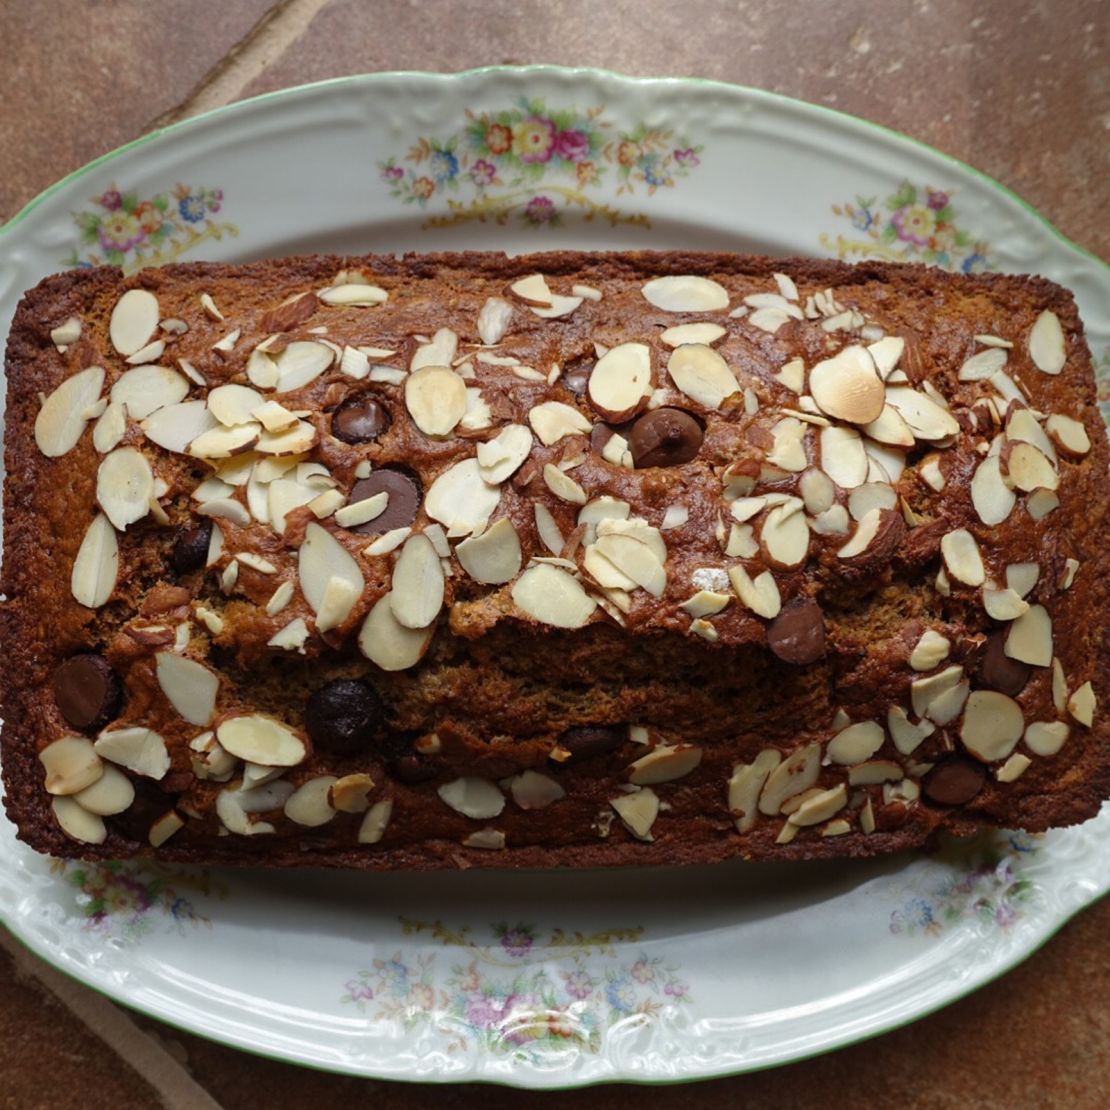 Taub-Dix's pumpkin bread with dark chocolate chips and almonds calls for canned pumpkin.